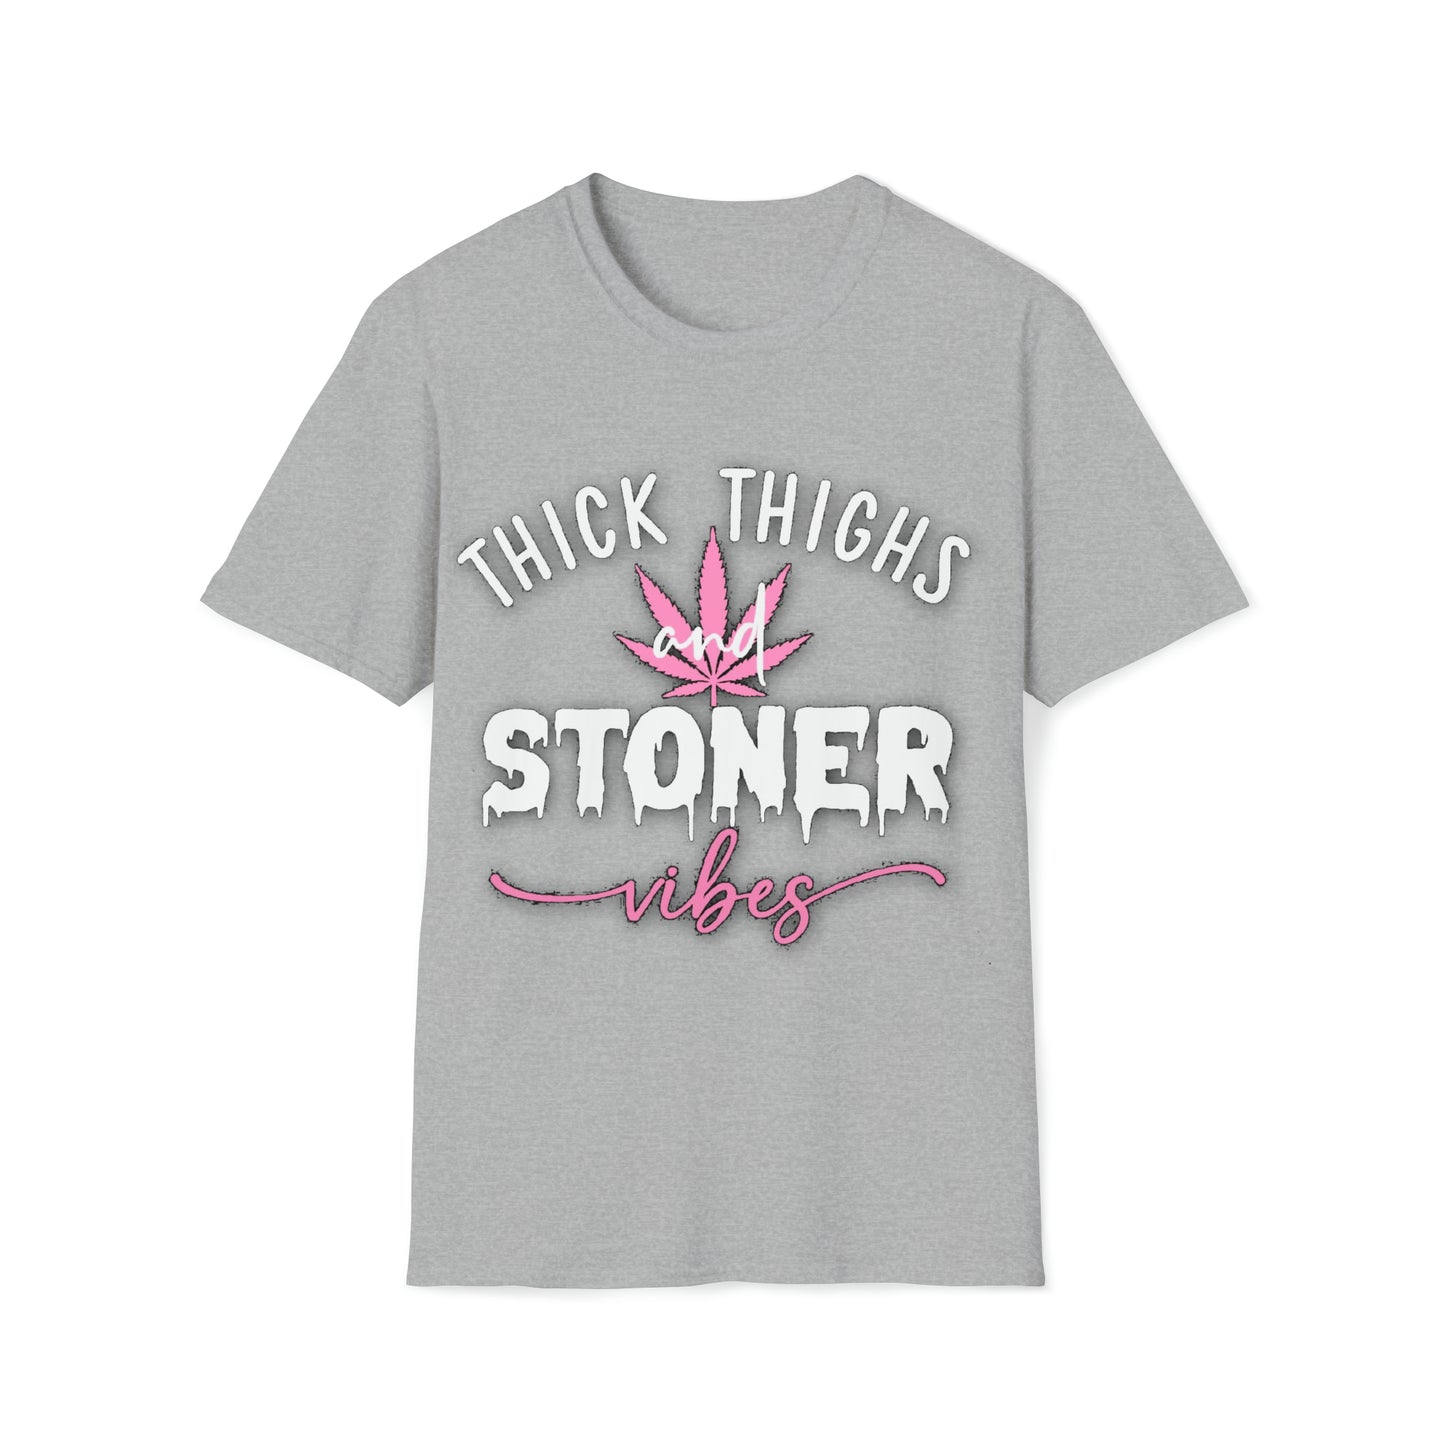 Thick thighs stoner vibes tee